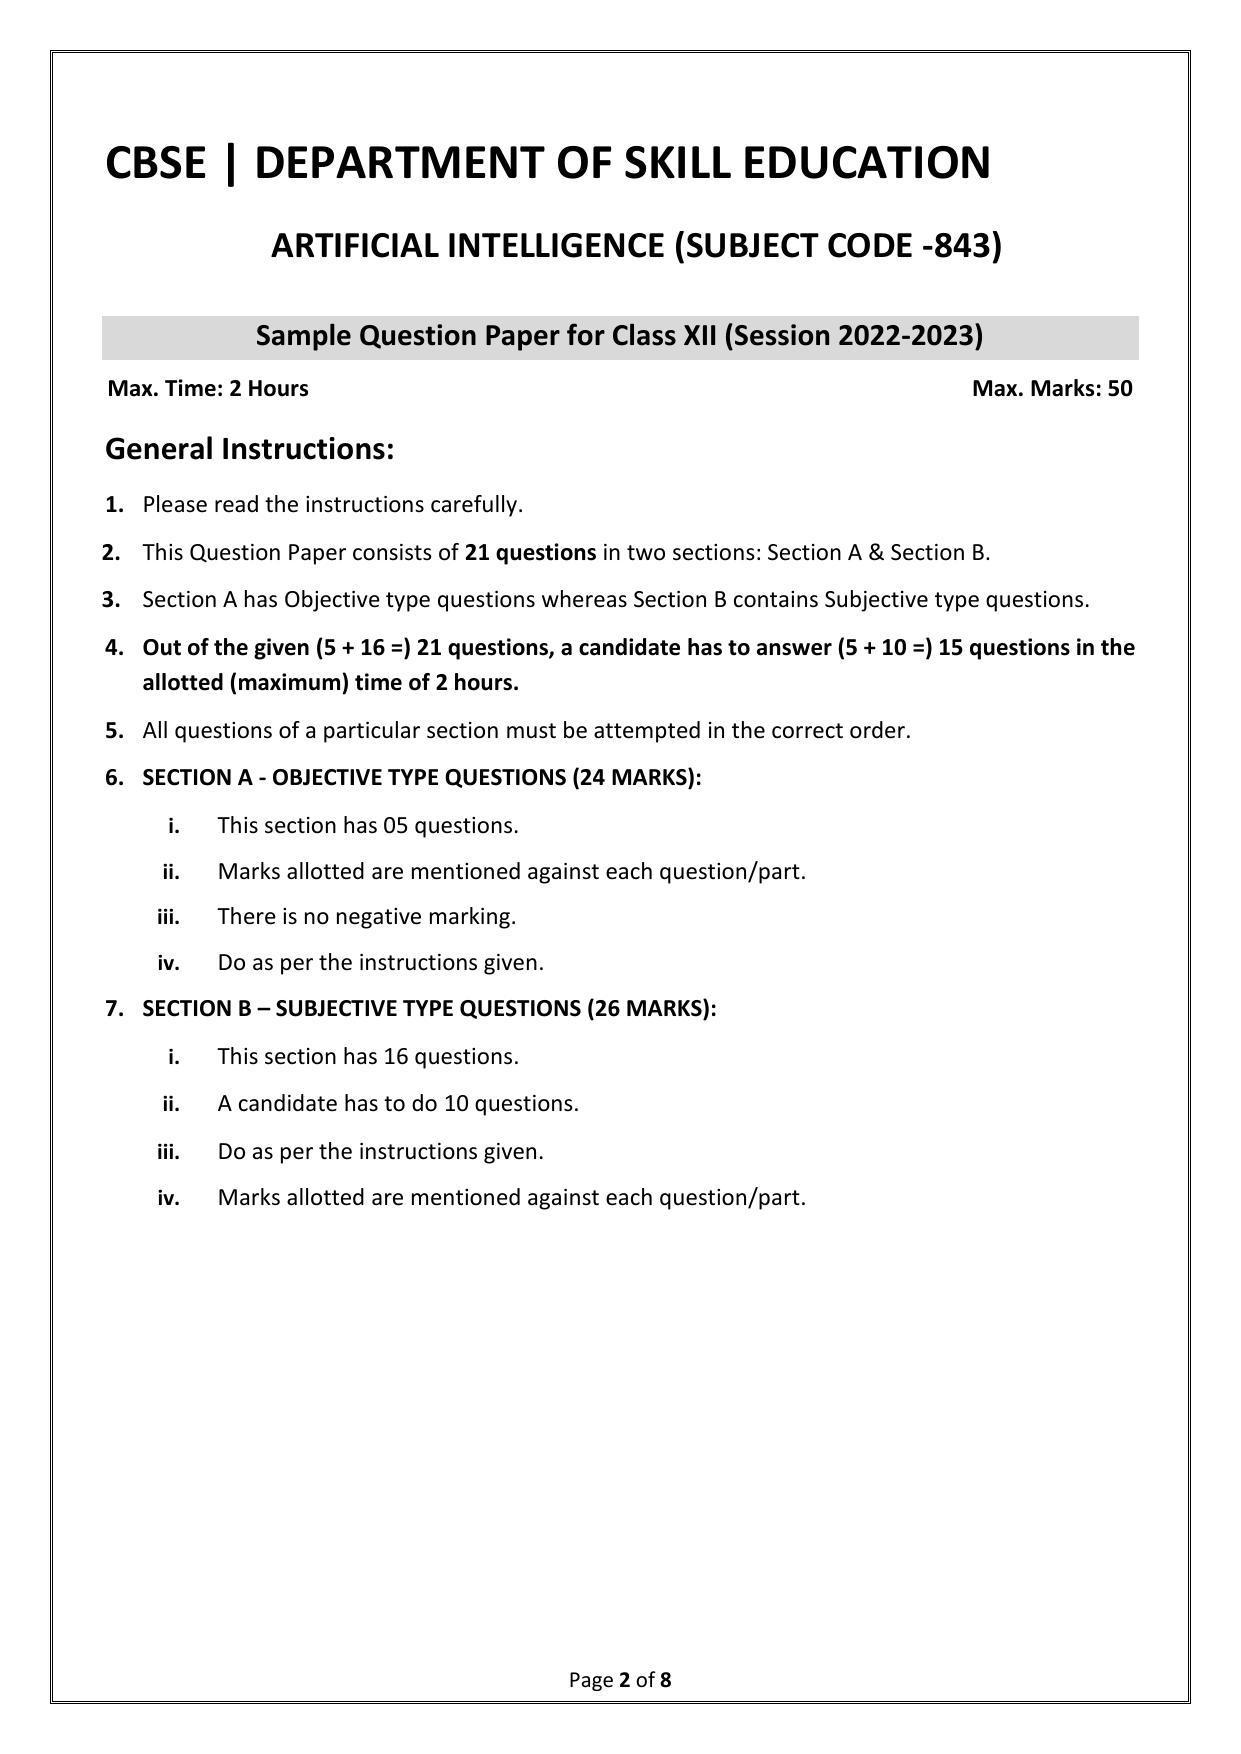 CBSE Class 12 Artificial Intelligence (Skill Education) Sample Papers 2023 - Page 2